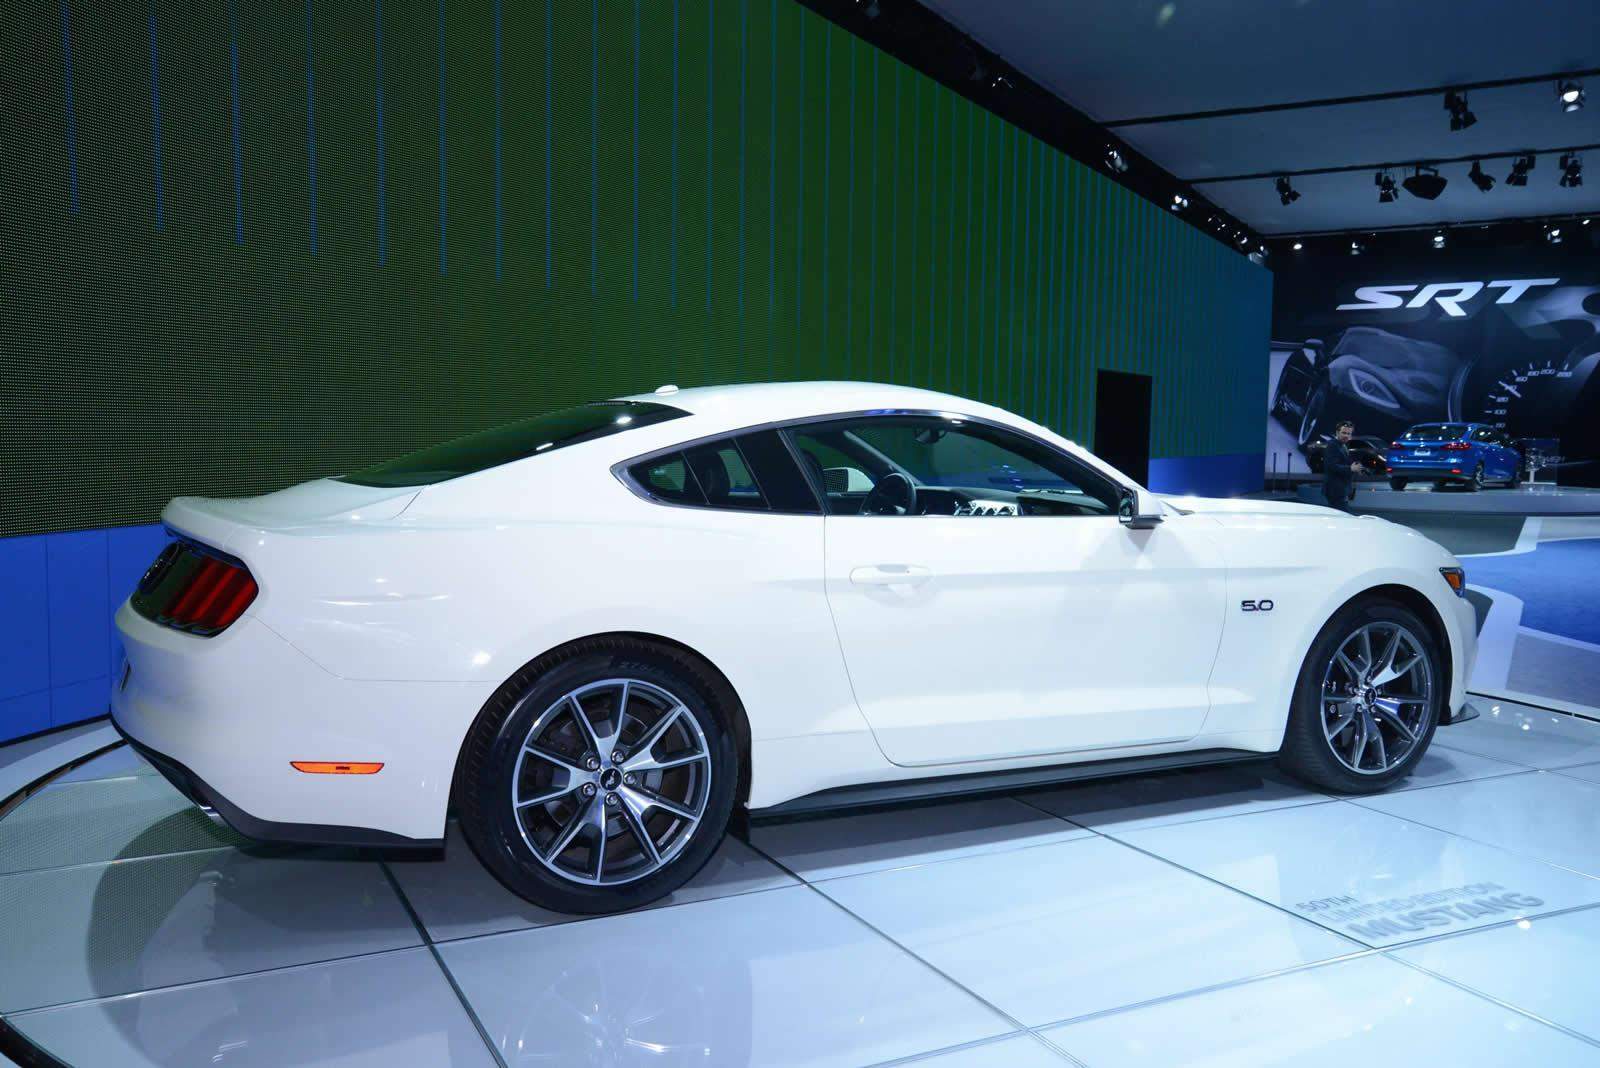 Ford-Mustang-50th-Anniversary-Limited-Edition 4